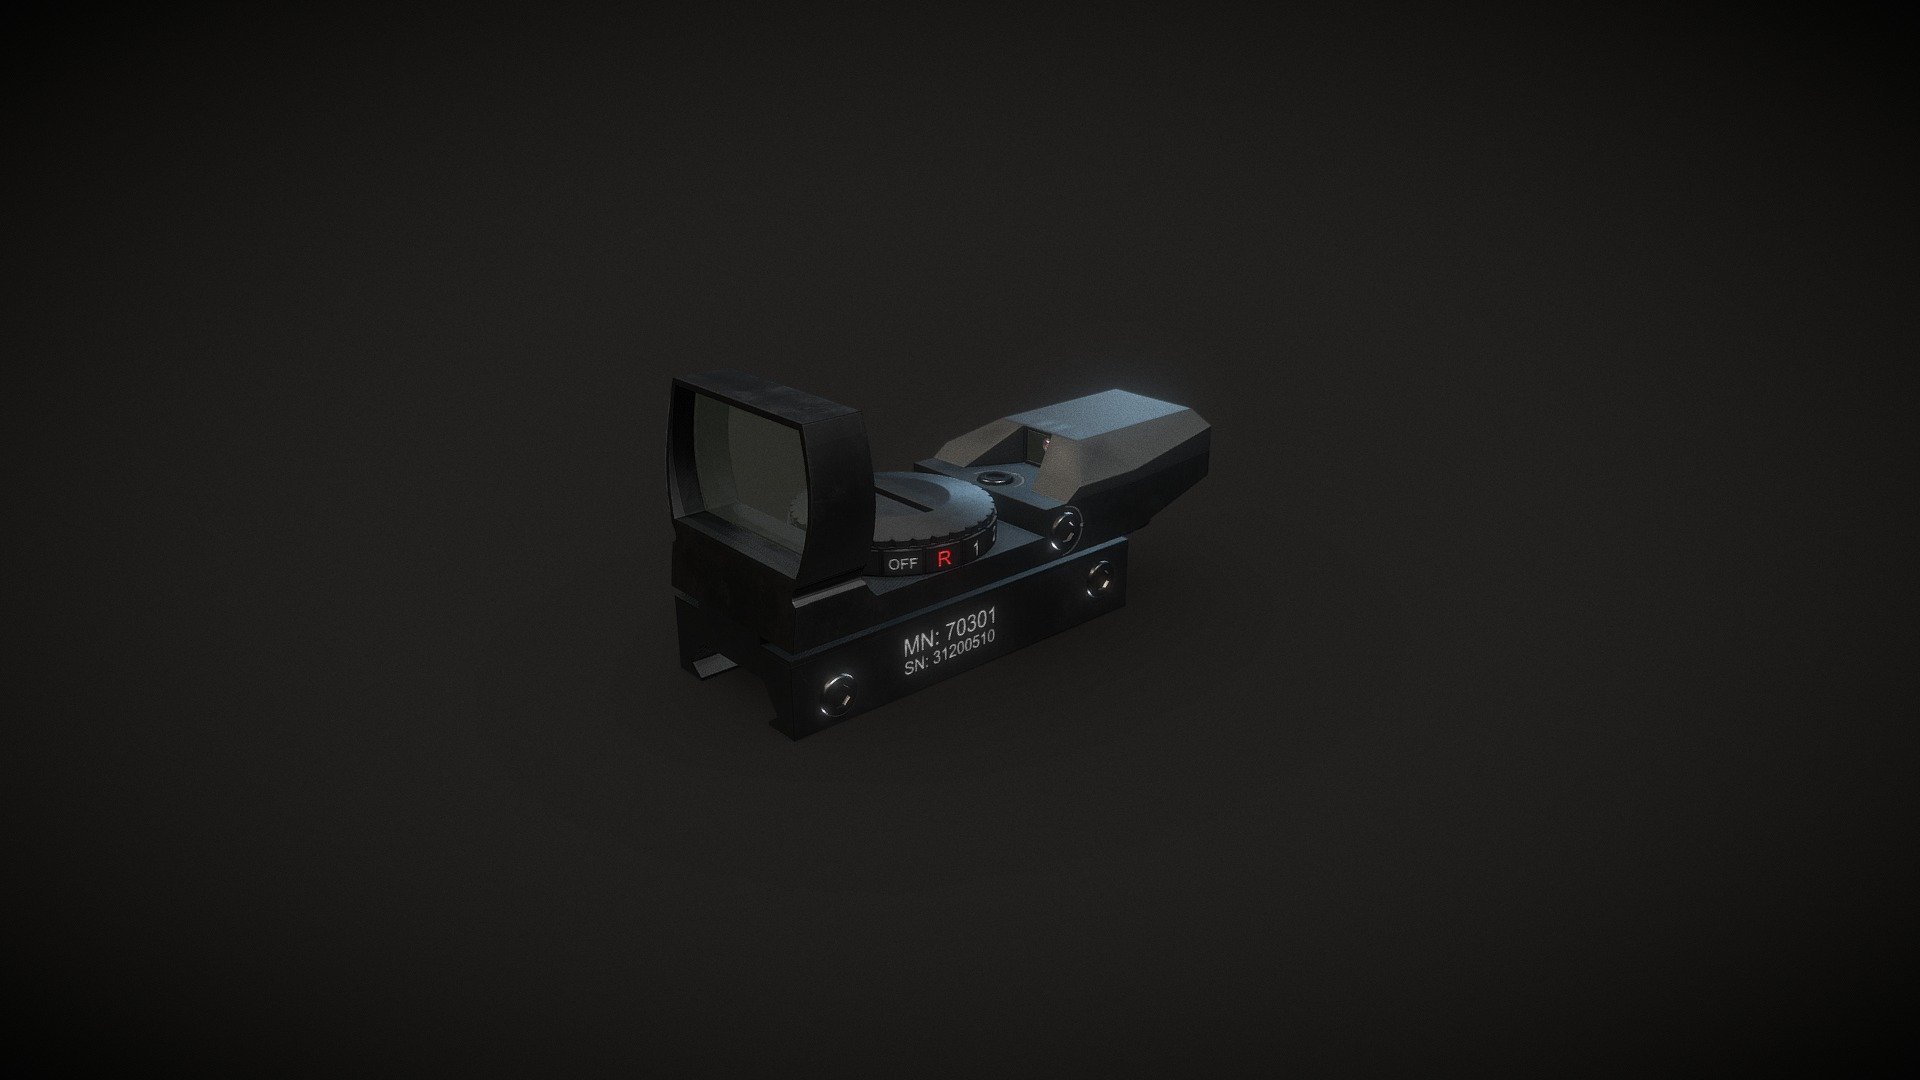 Red Dot Scope I worked on as an afternoon practice project.

Uses PBR materials and topped out at 4,688 tris 3d model